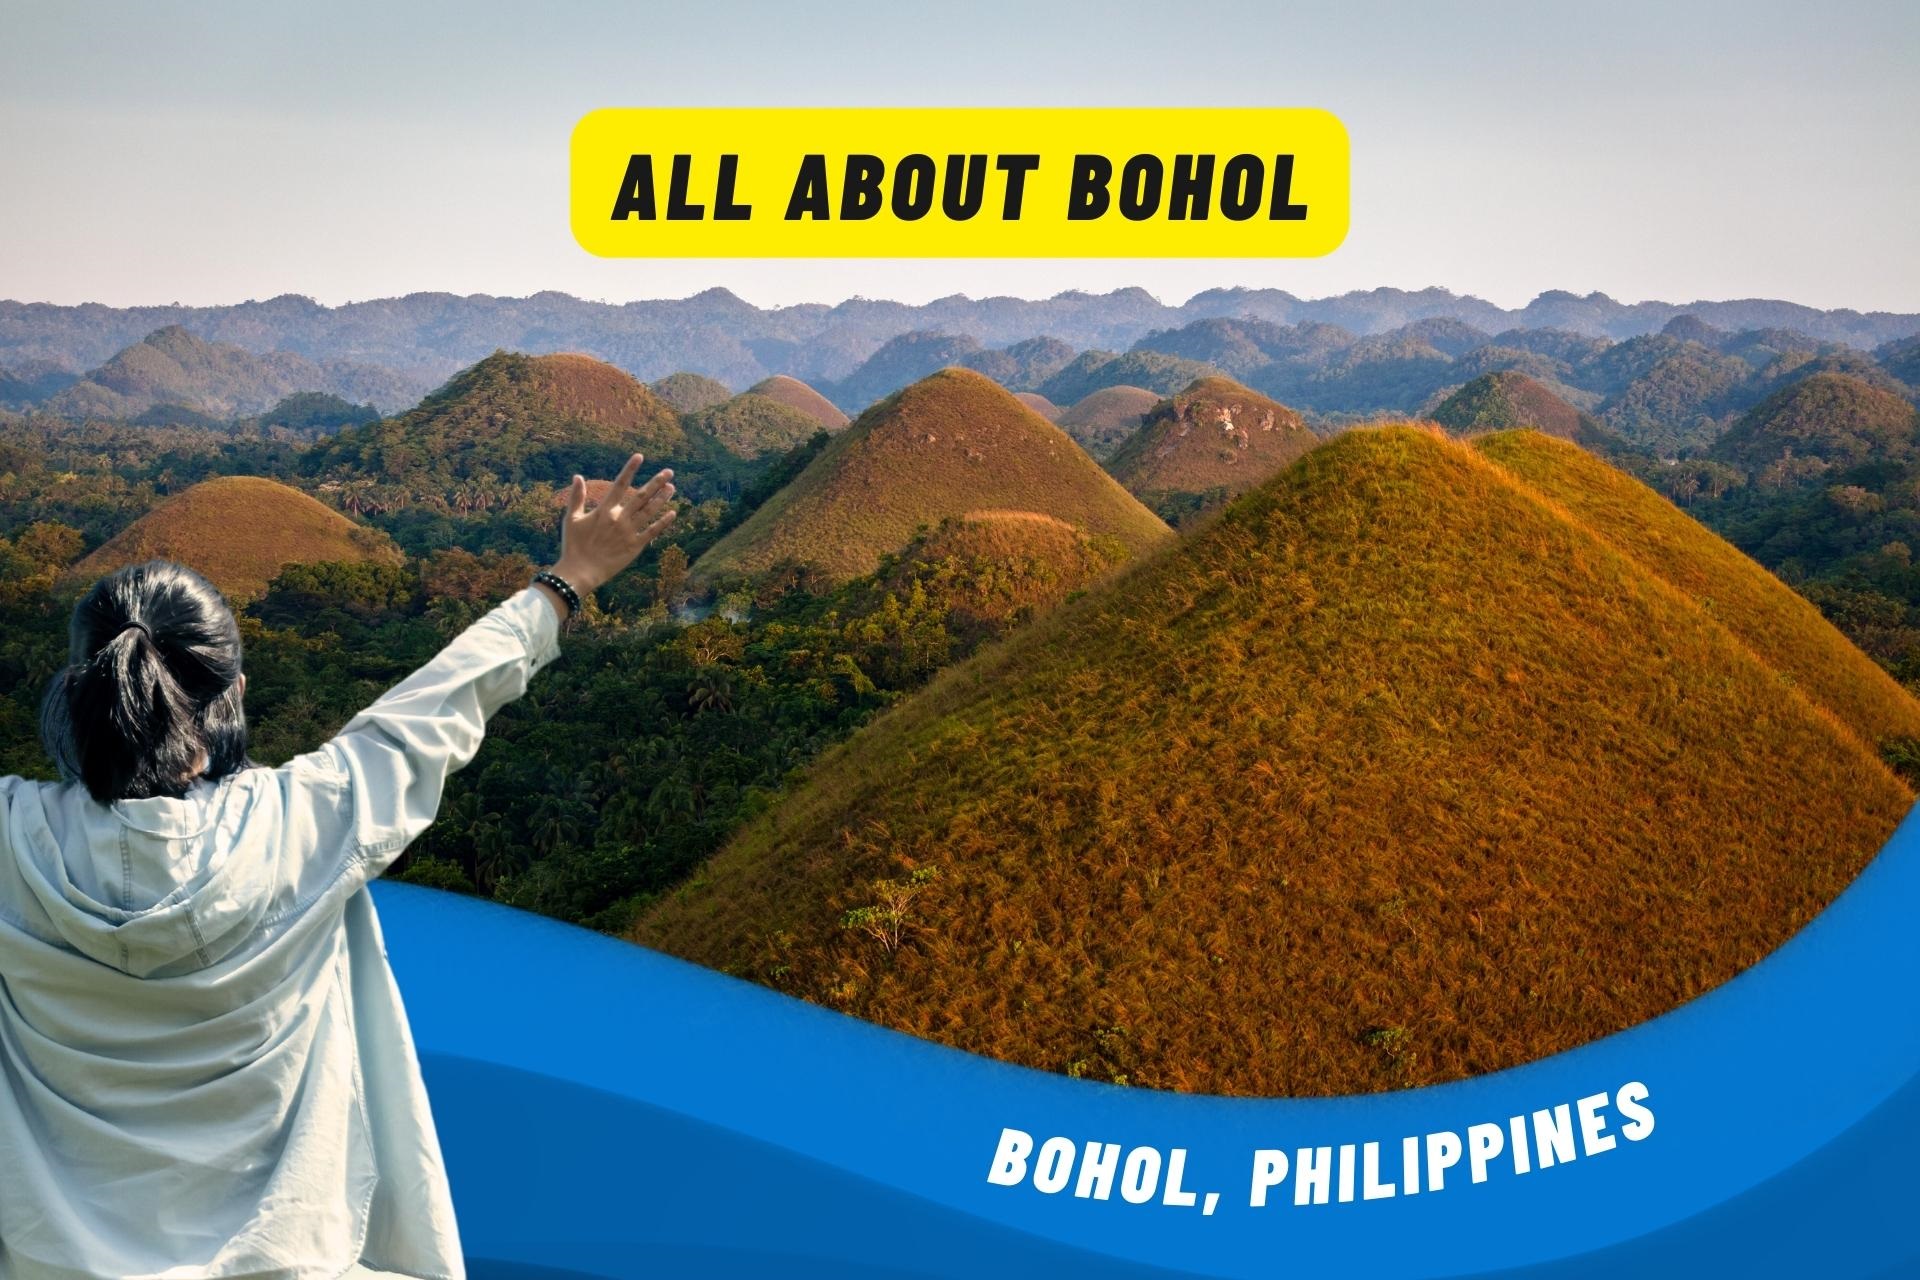 Complete information about Bohol